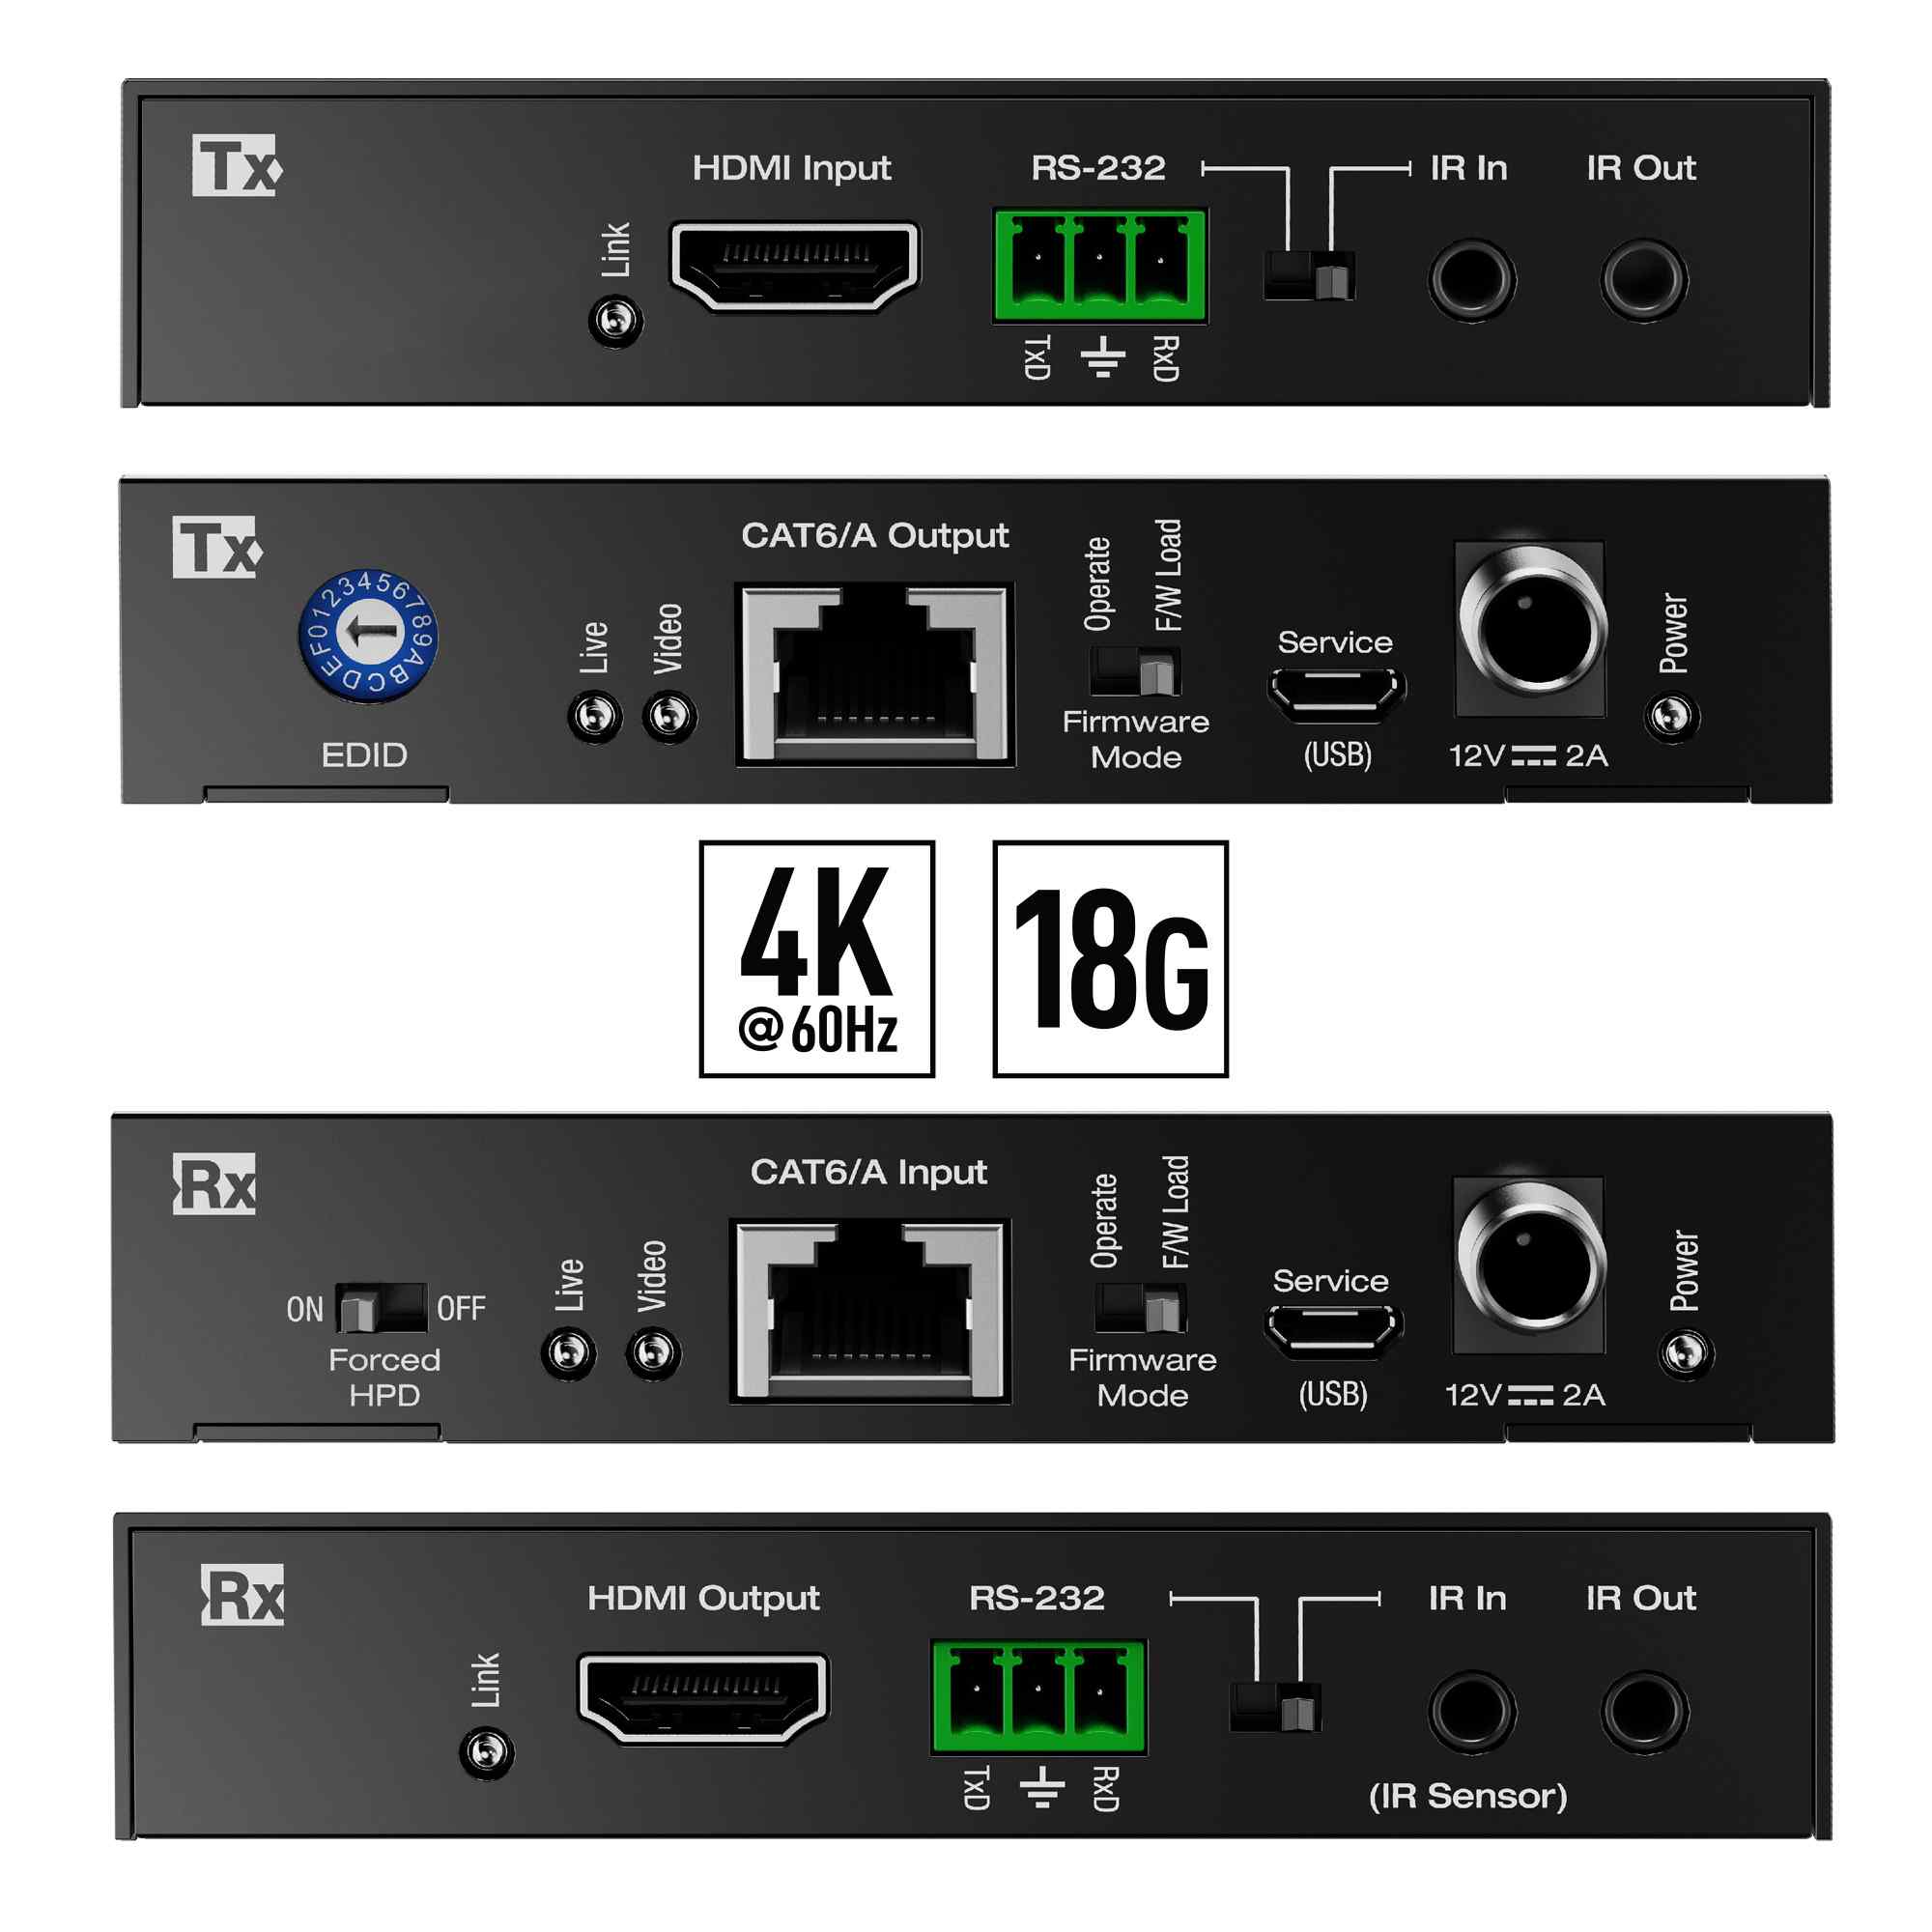 Thumbnail of KD hdmi extender 4k Tx and Rx front and rear